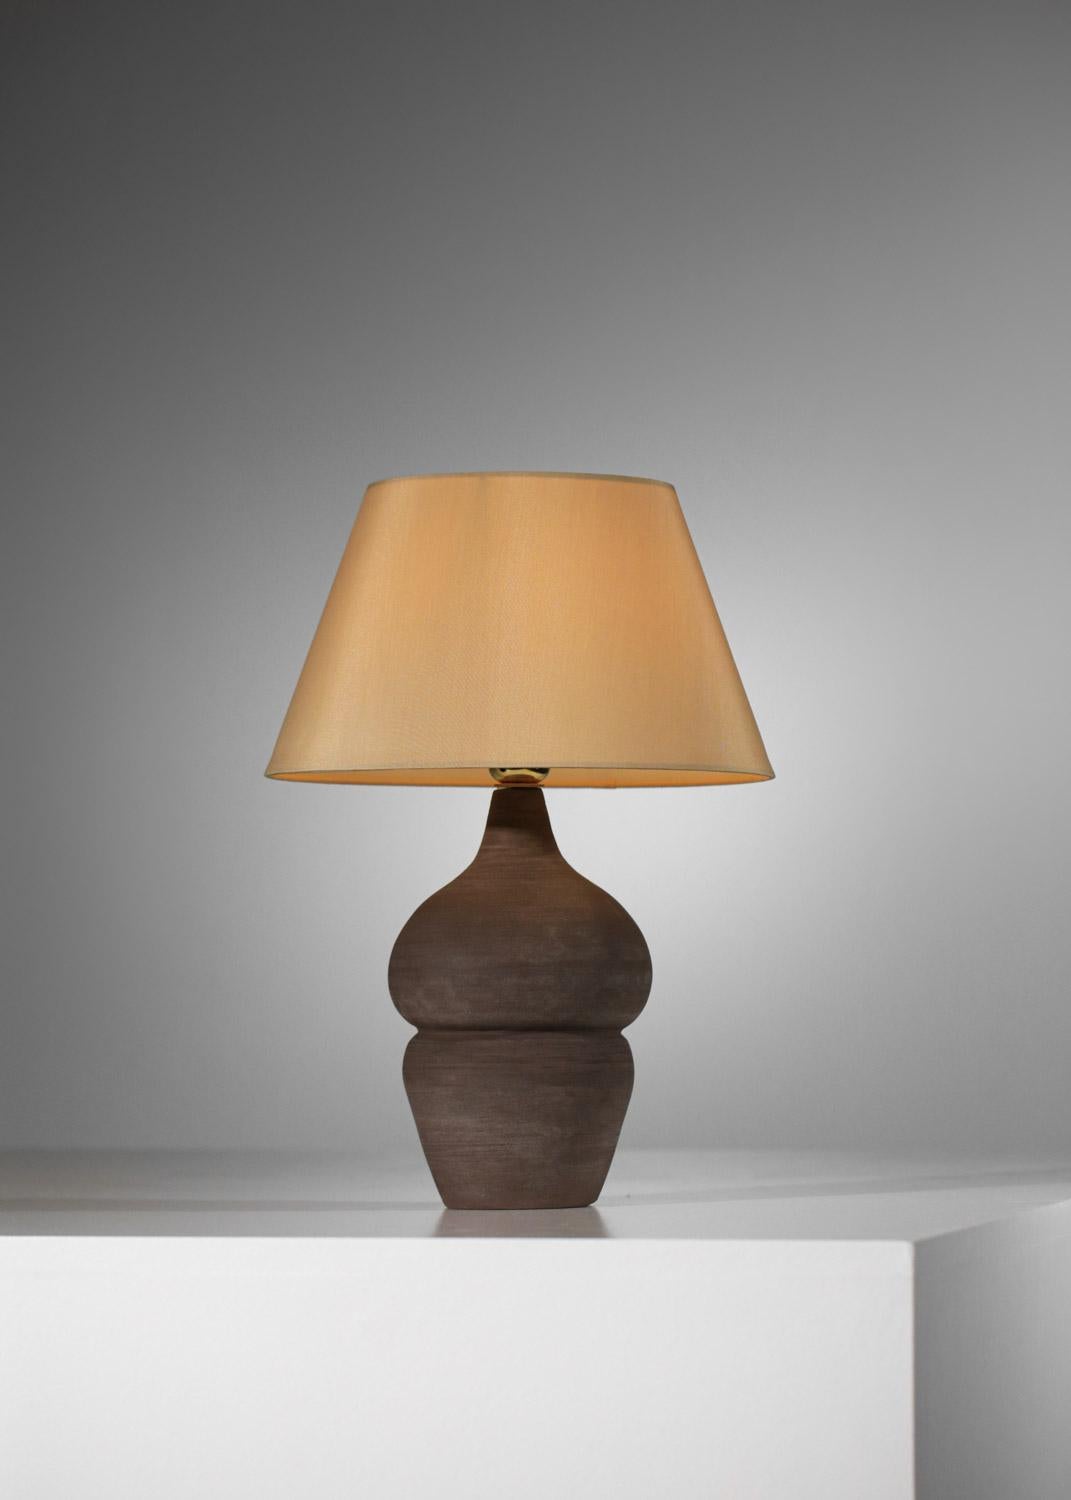 The Danke Galerie team is delighted to present the latest creation by self-taught Lyon ceramist Katia Mihaylova. This modern table lamp was created and handcrafted in black chamotte stoneware using the wheel throwing technique. Custom quantities and